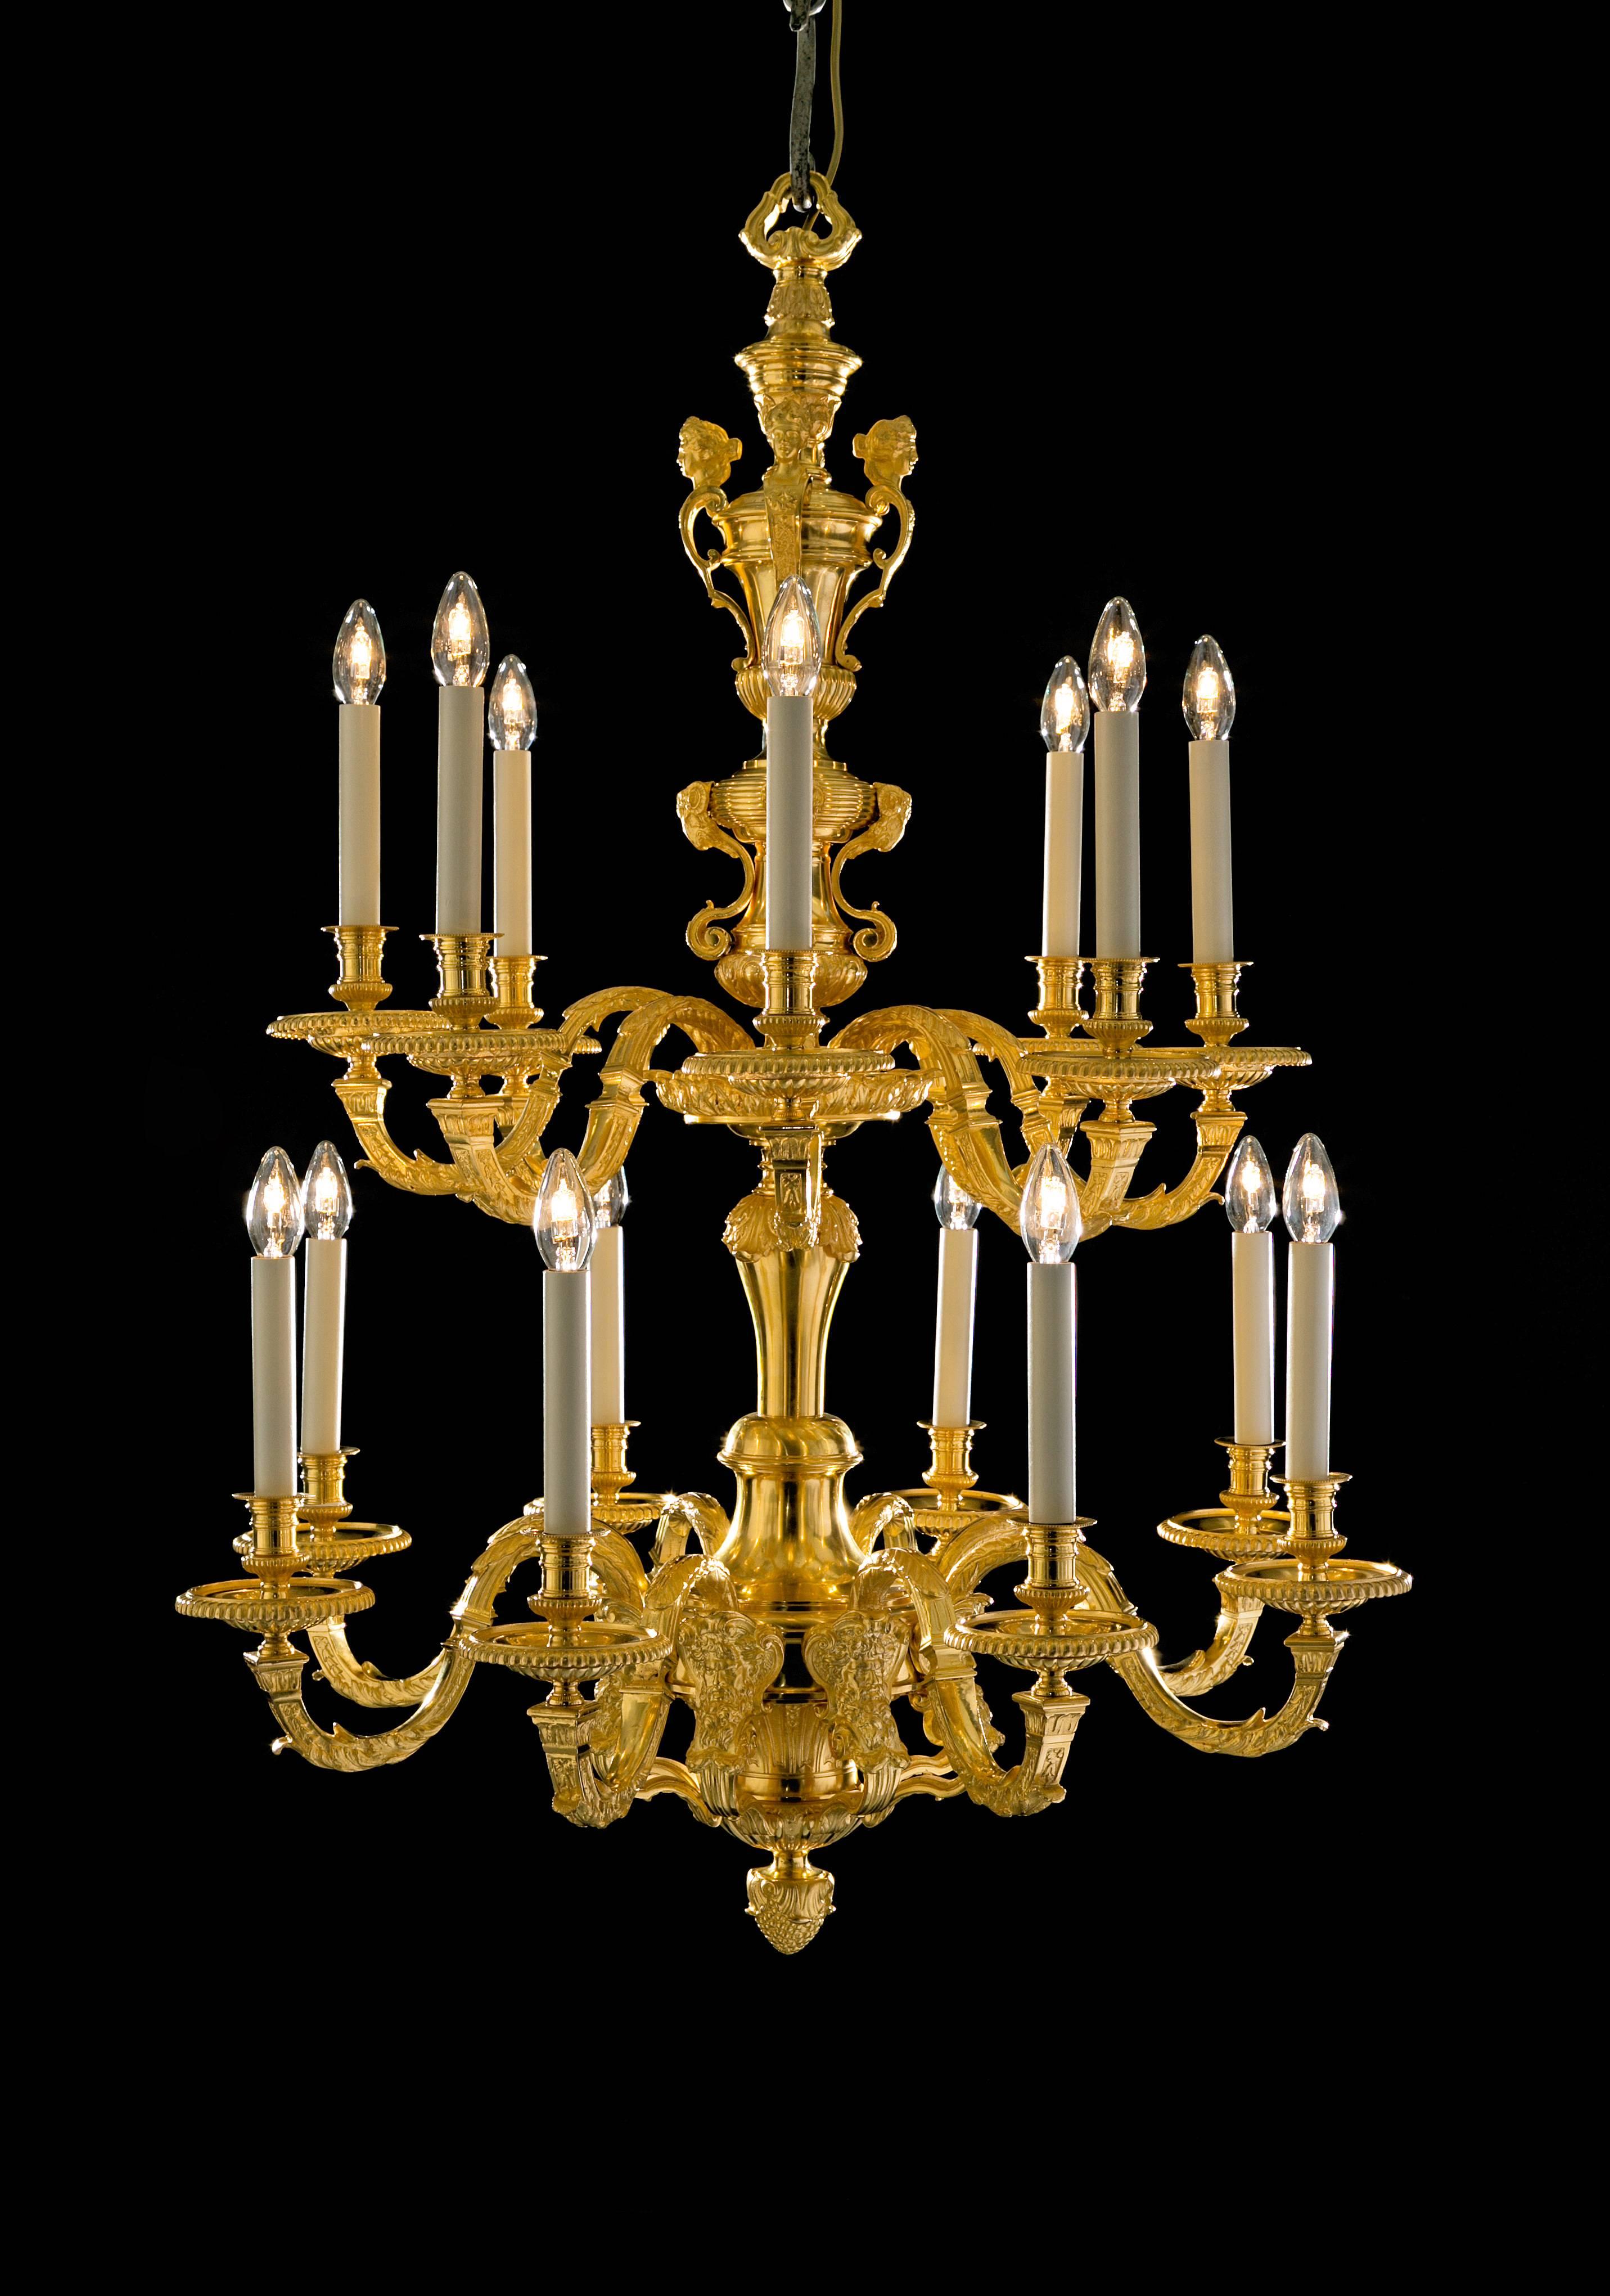 This elegant chandelier 19th century, combines several features found of examples of pieces by Andre-Charles Boulle, caryatids, rams heads and Bacchic masks.
The quality of the casting is superb.

Provenance: Reputedly from Cranbrook School,